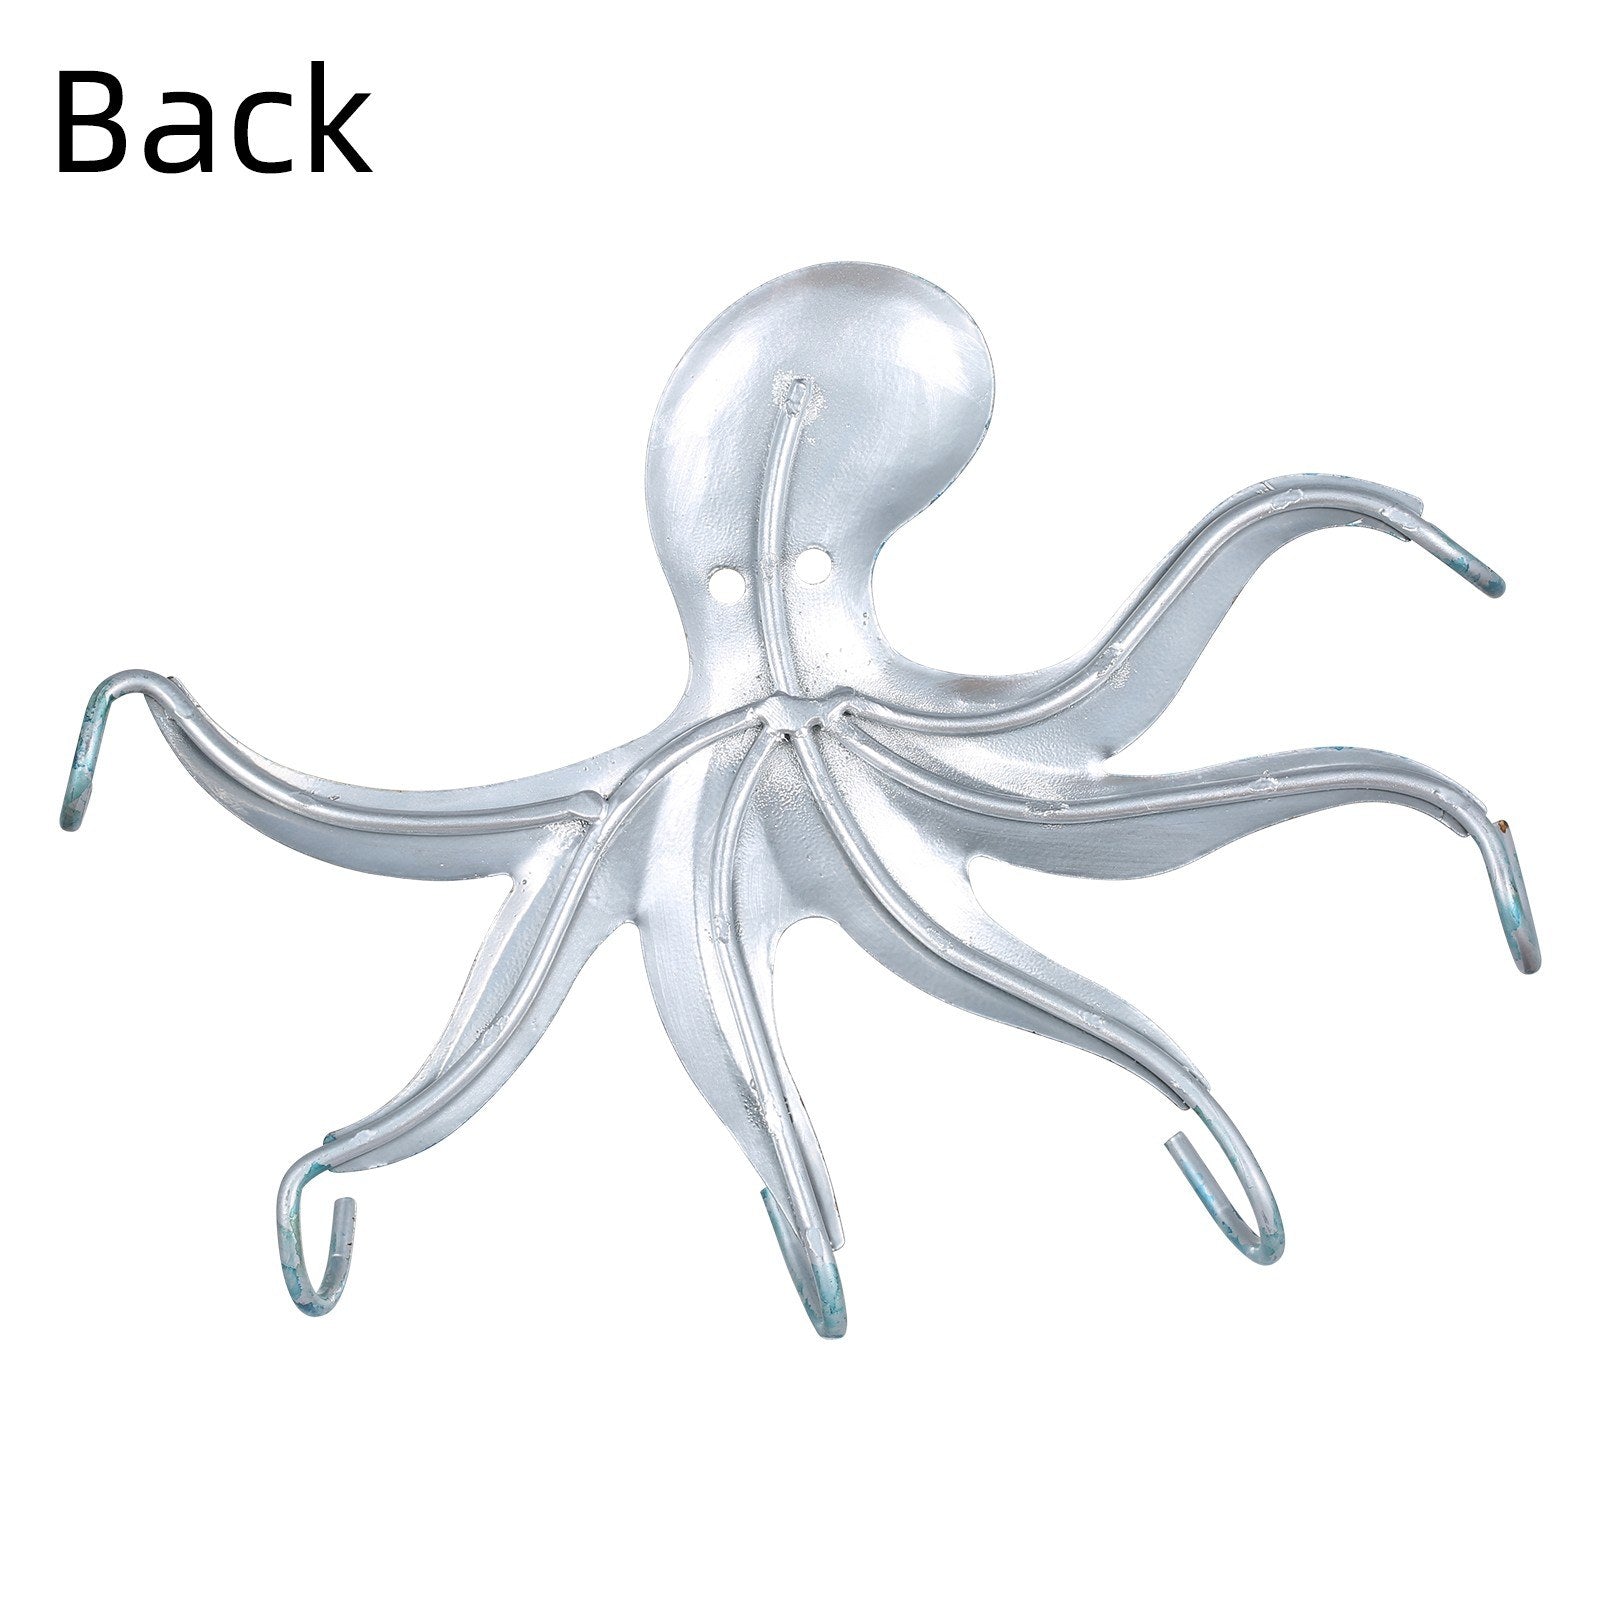 The octopus wall hook is a very good decoration for your home